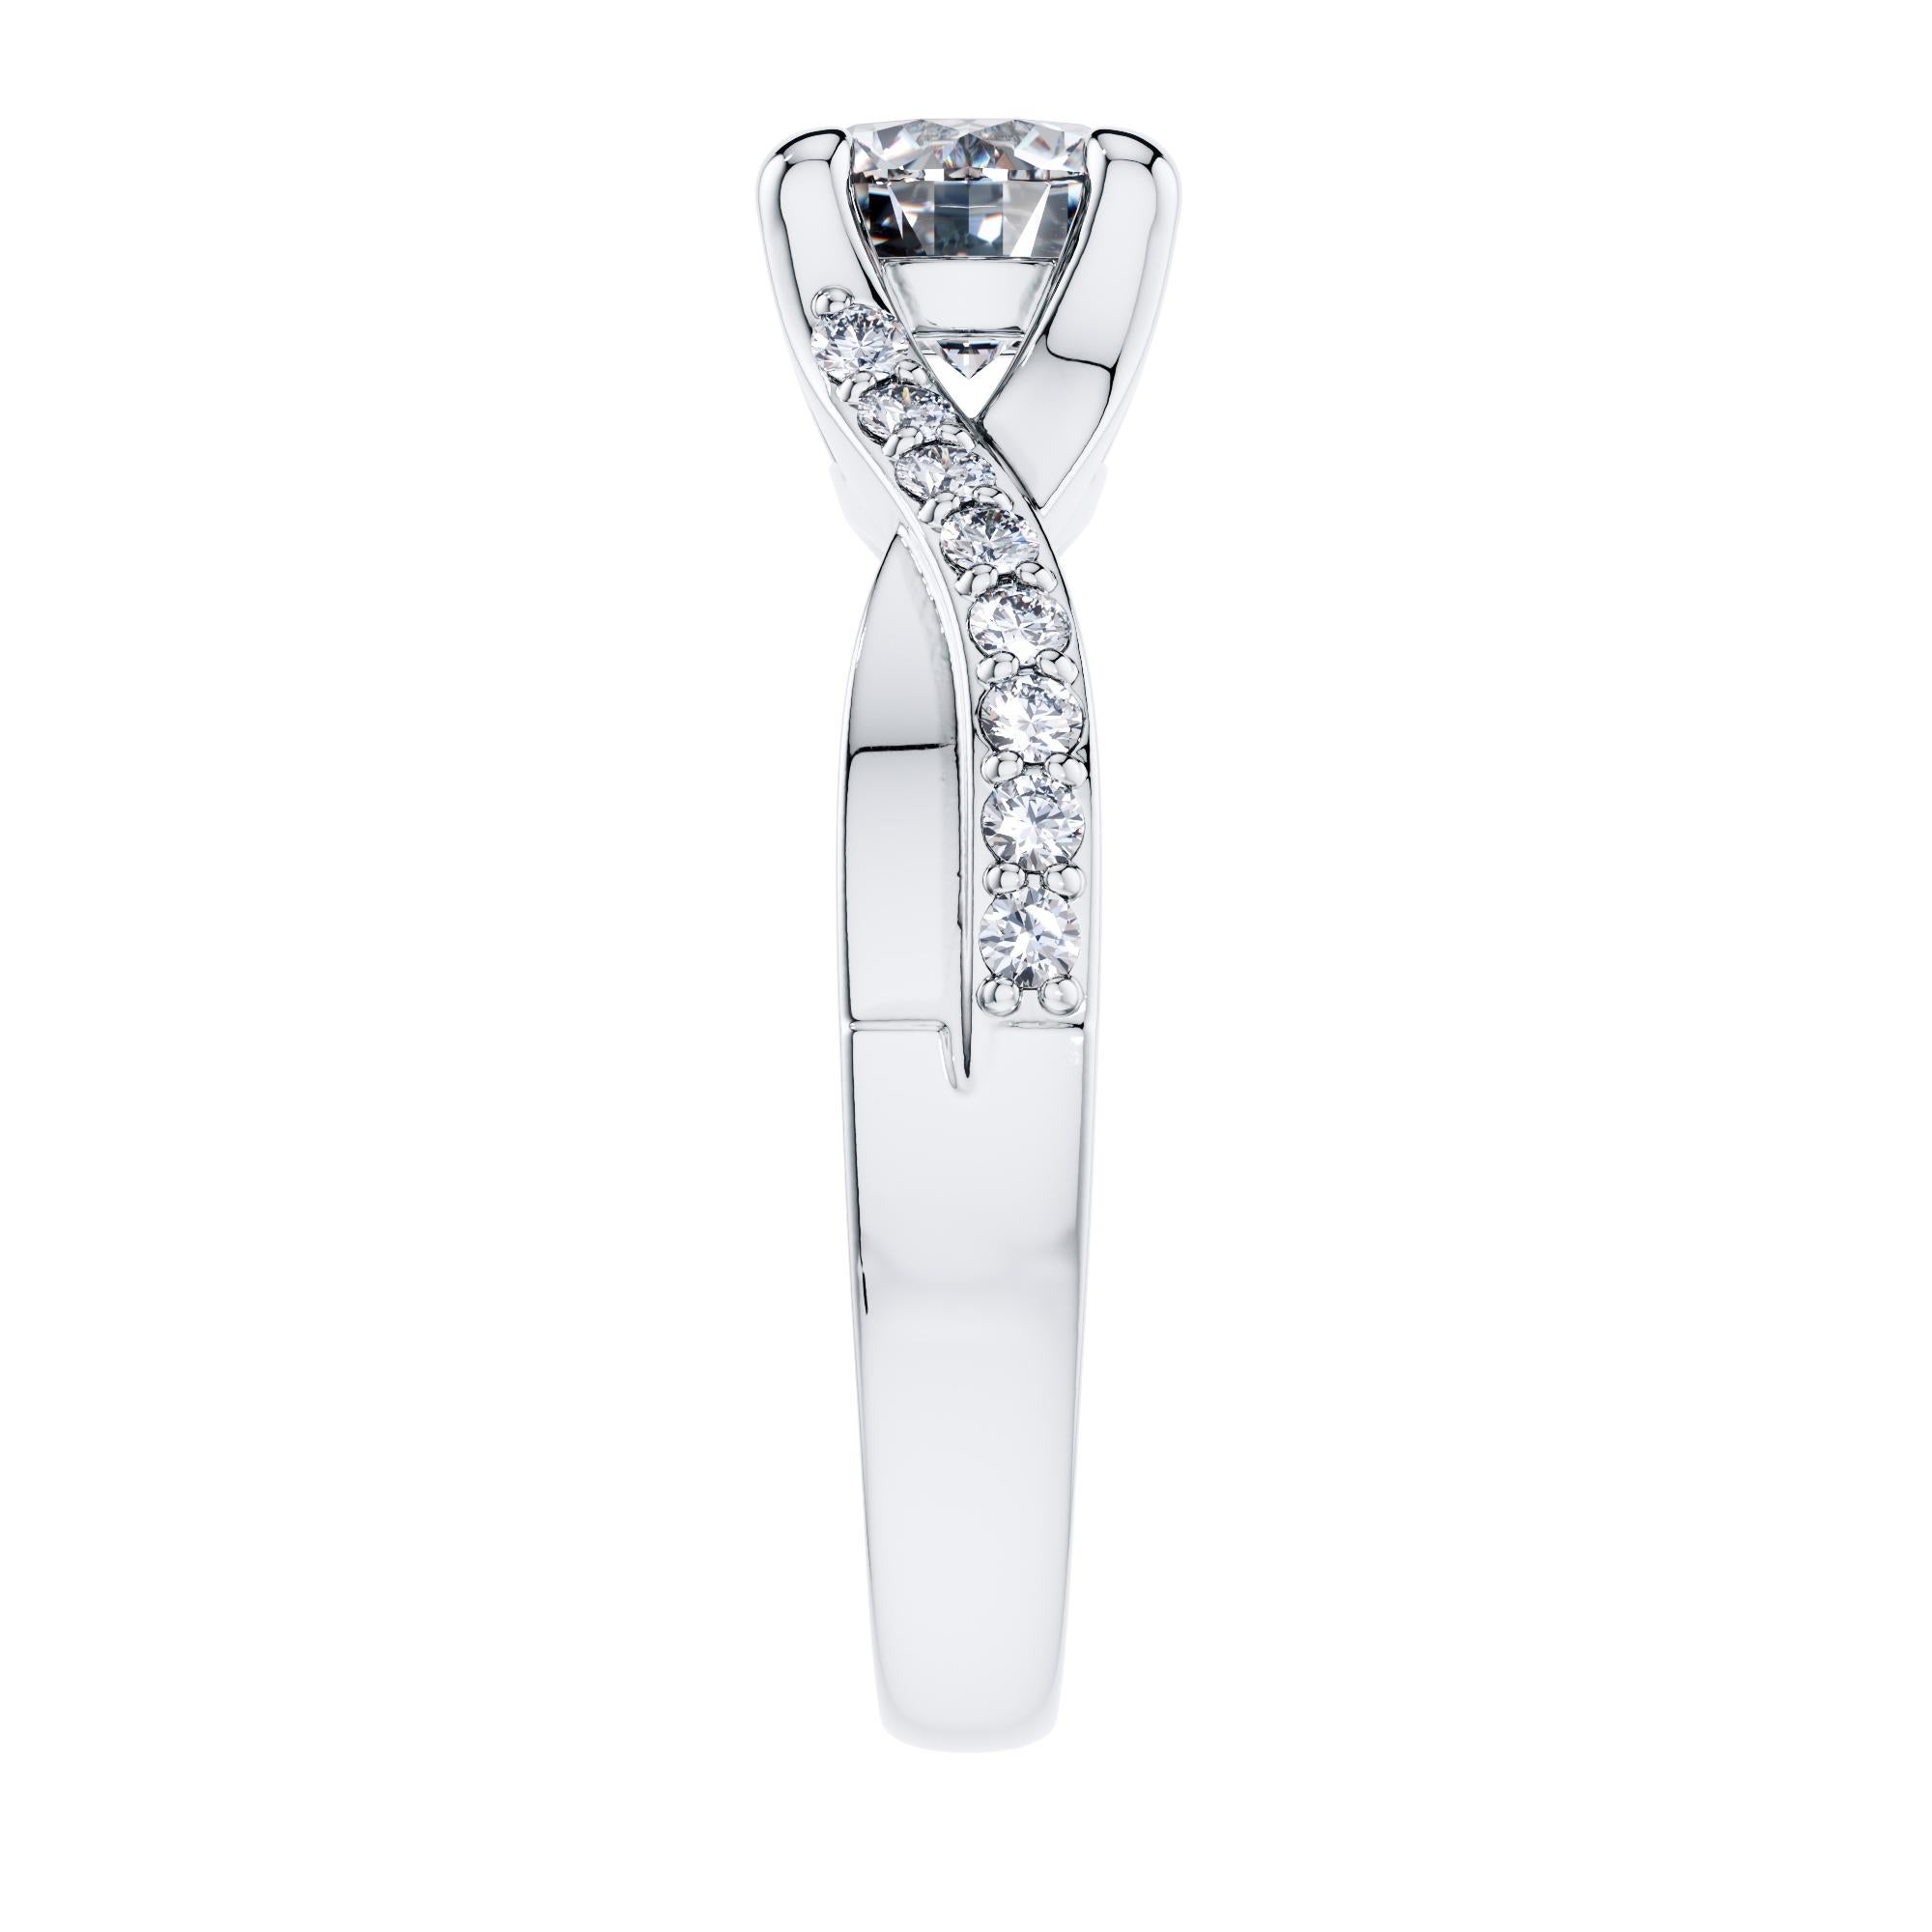 For a beautifully entwined journey together, this gleaming twisted vine modern classic engagement ring. Handmade in 18 Karat White Gold, with a total of 2.18 Carat White Diamonds. Set in an open gallery 4 prong mount with a split shank that has one